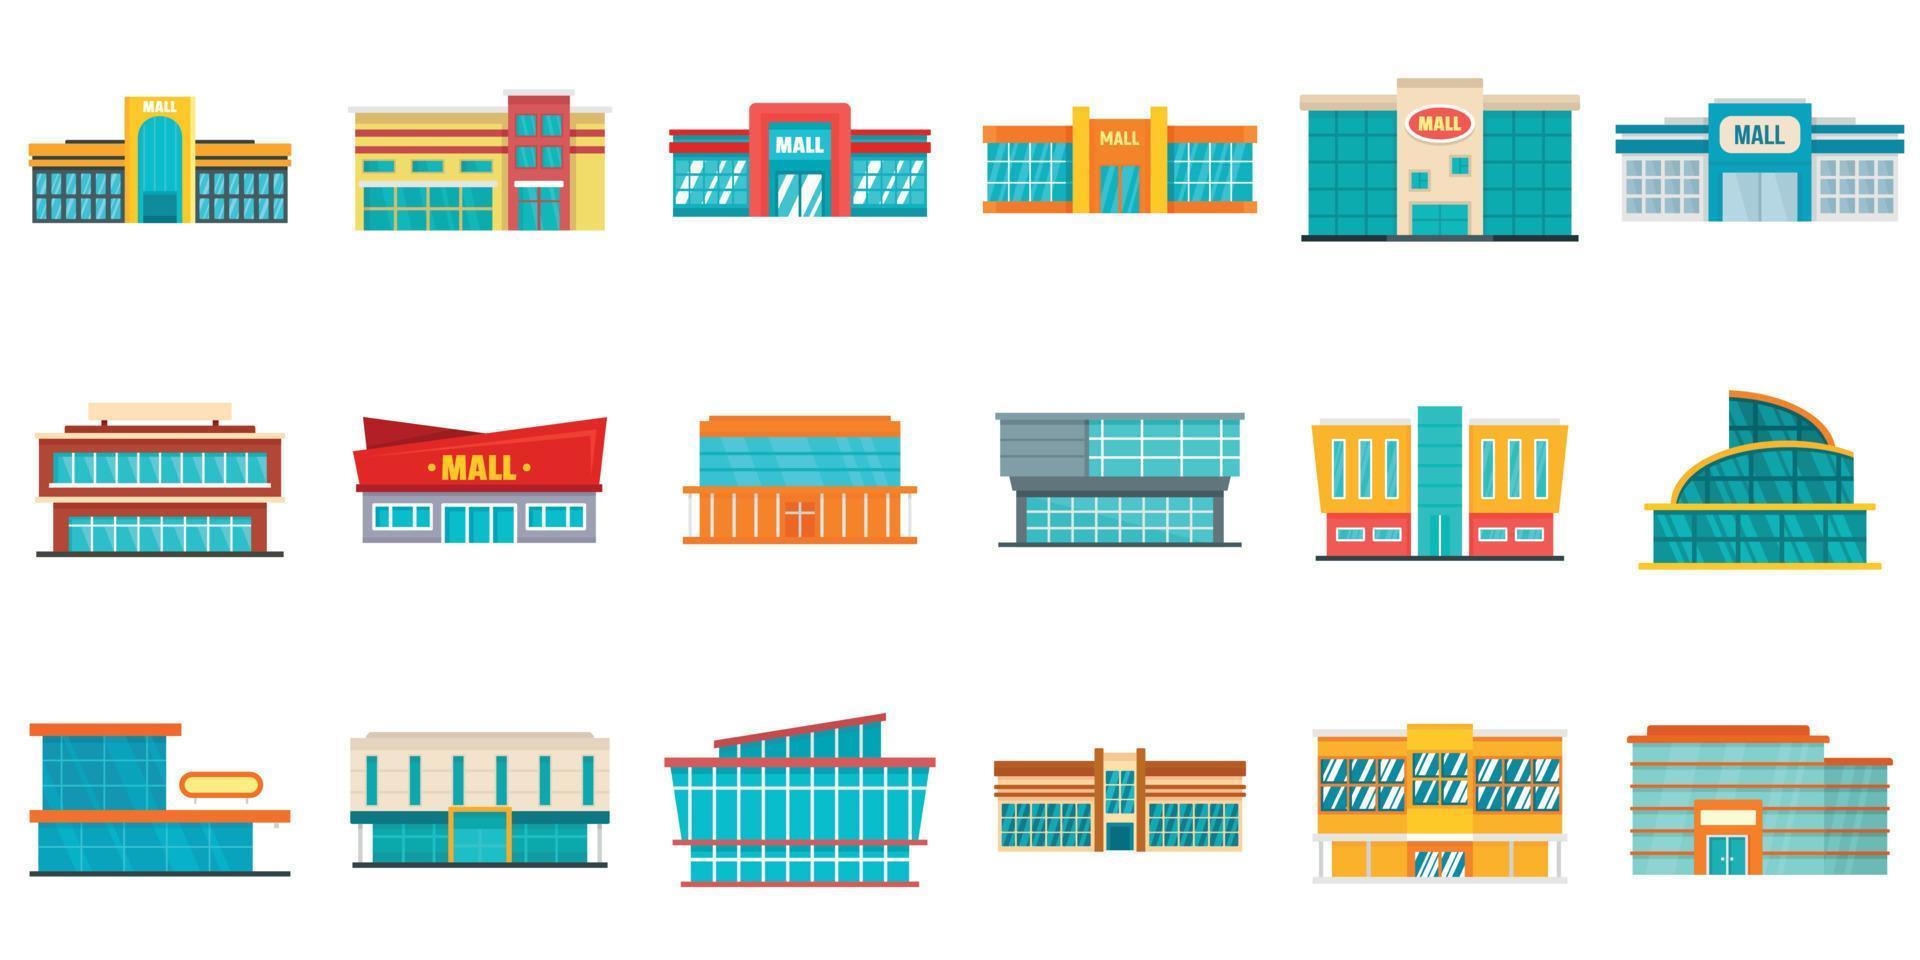 Mall icons set, flat style vector